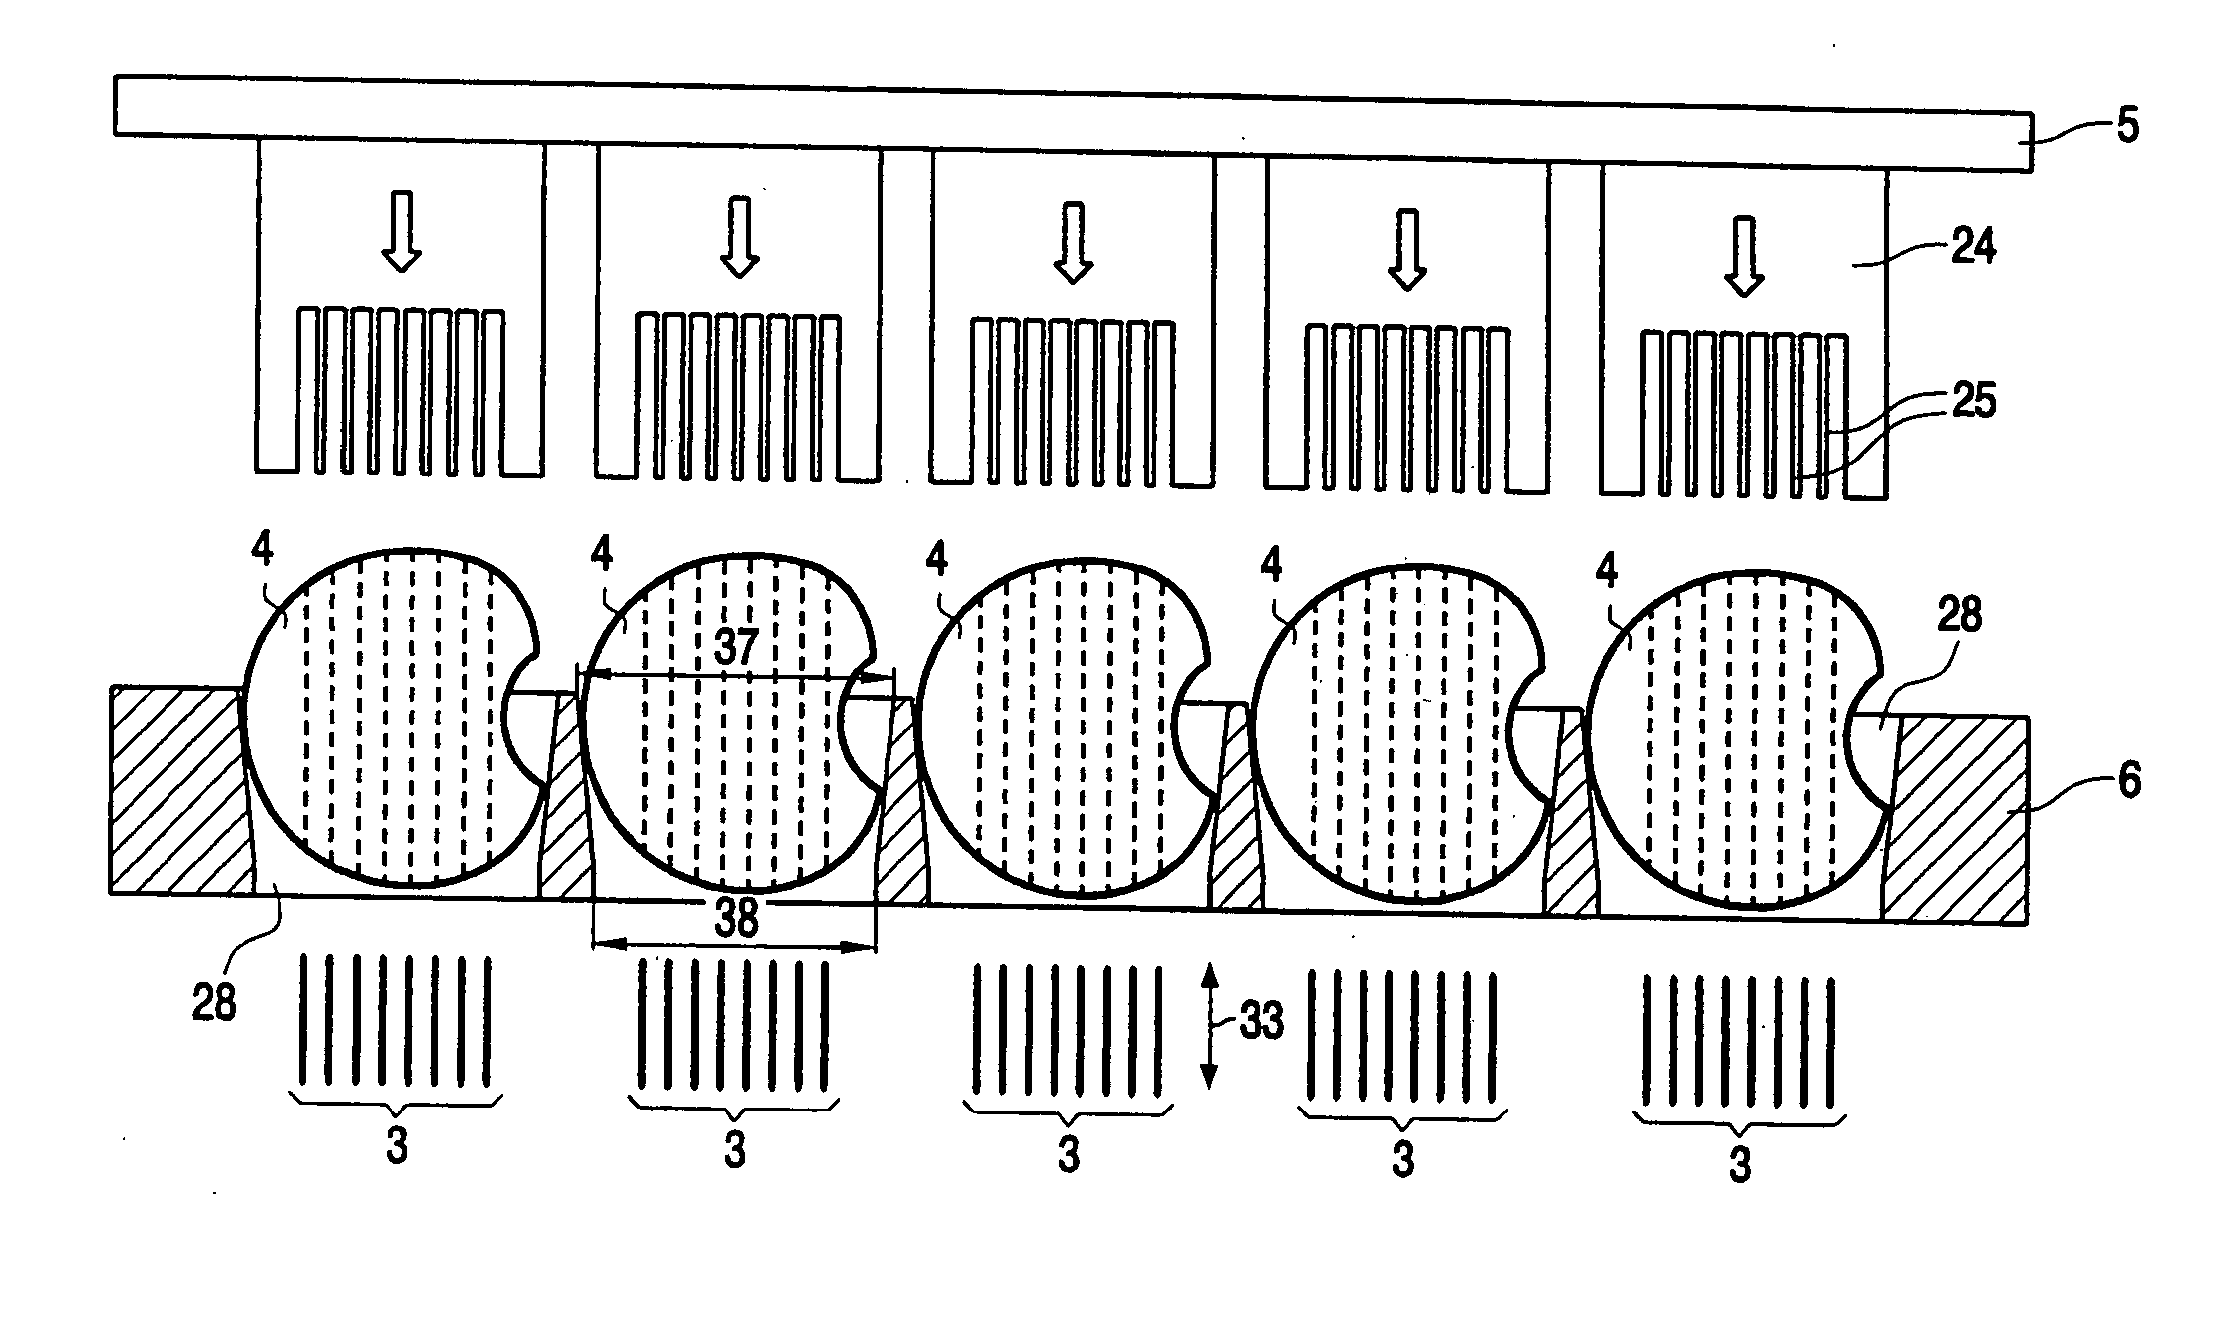 Method and apparatus for slicing a number of articles into a plurality of uniform thin slices in a single operation